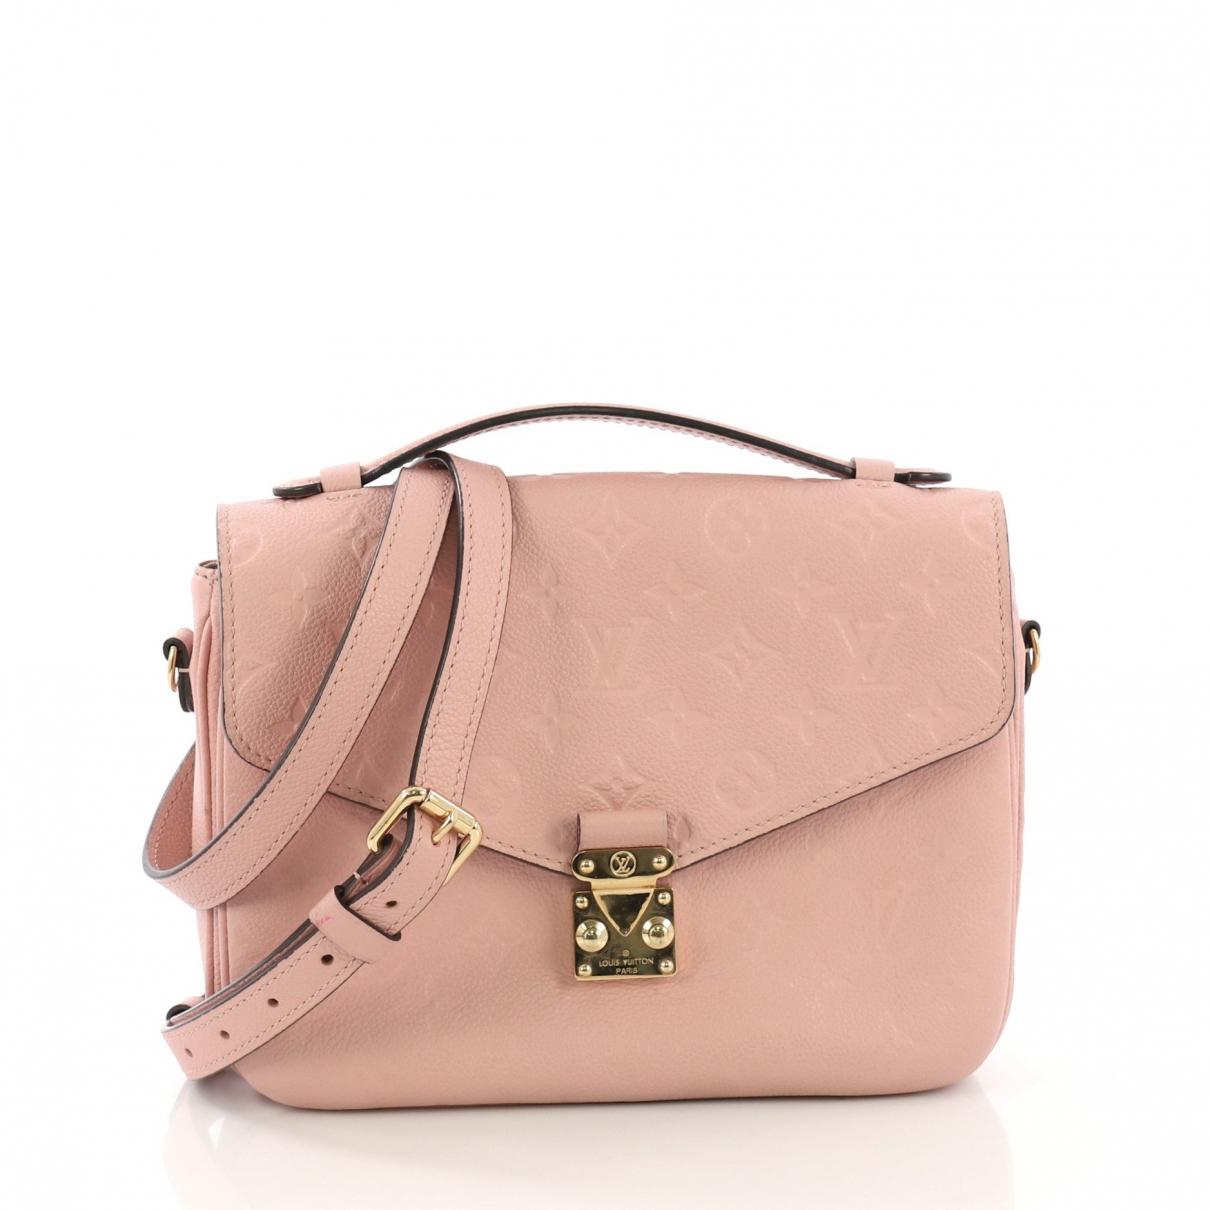 Louis Vuitton Pink Leather Bag